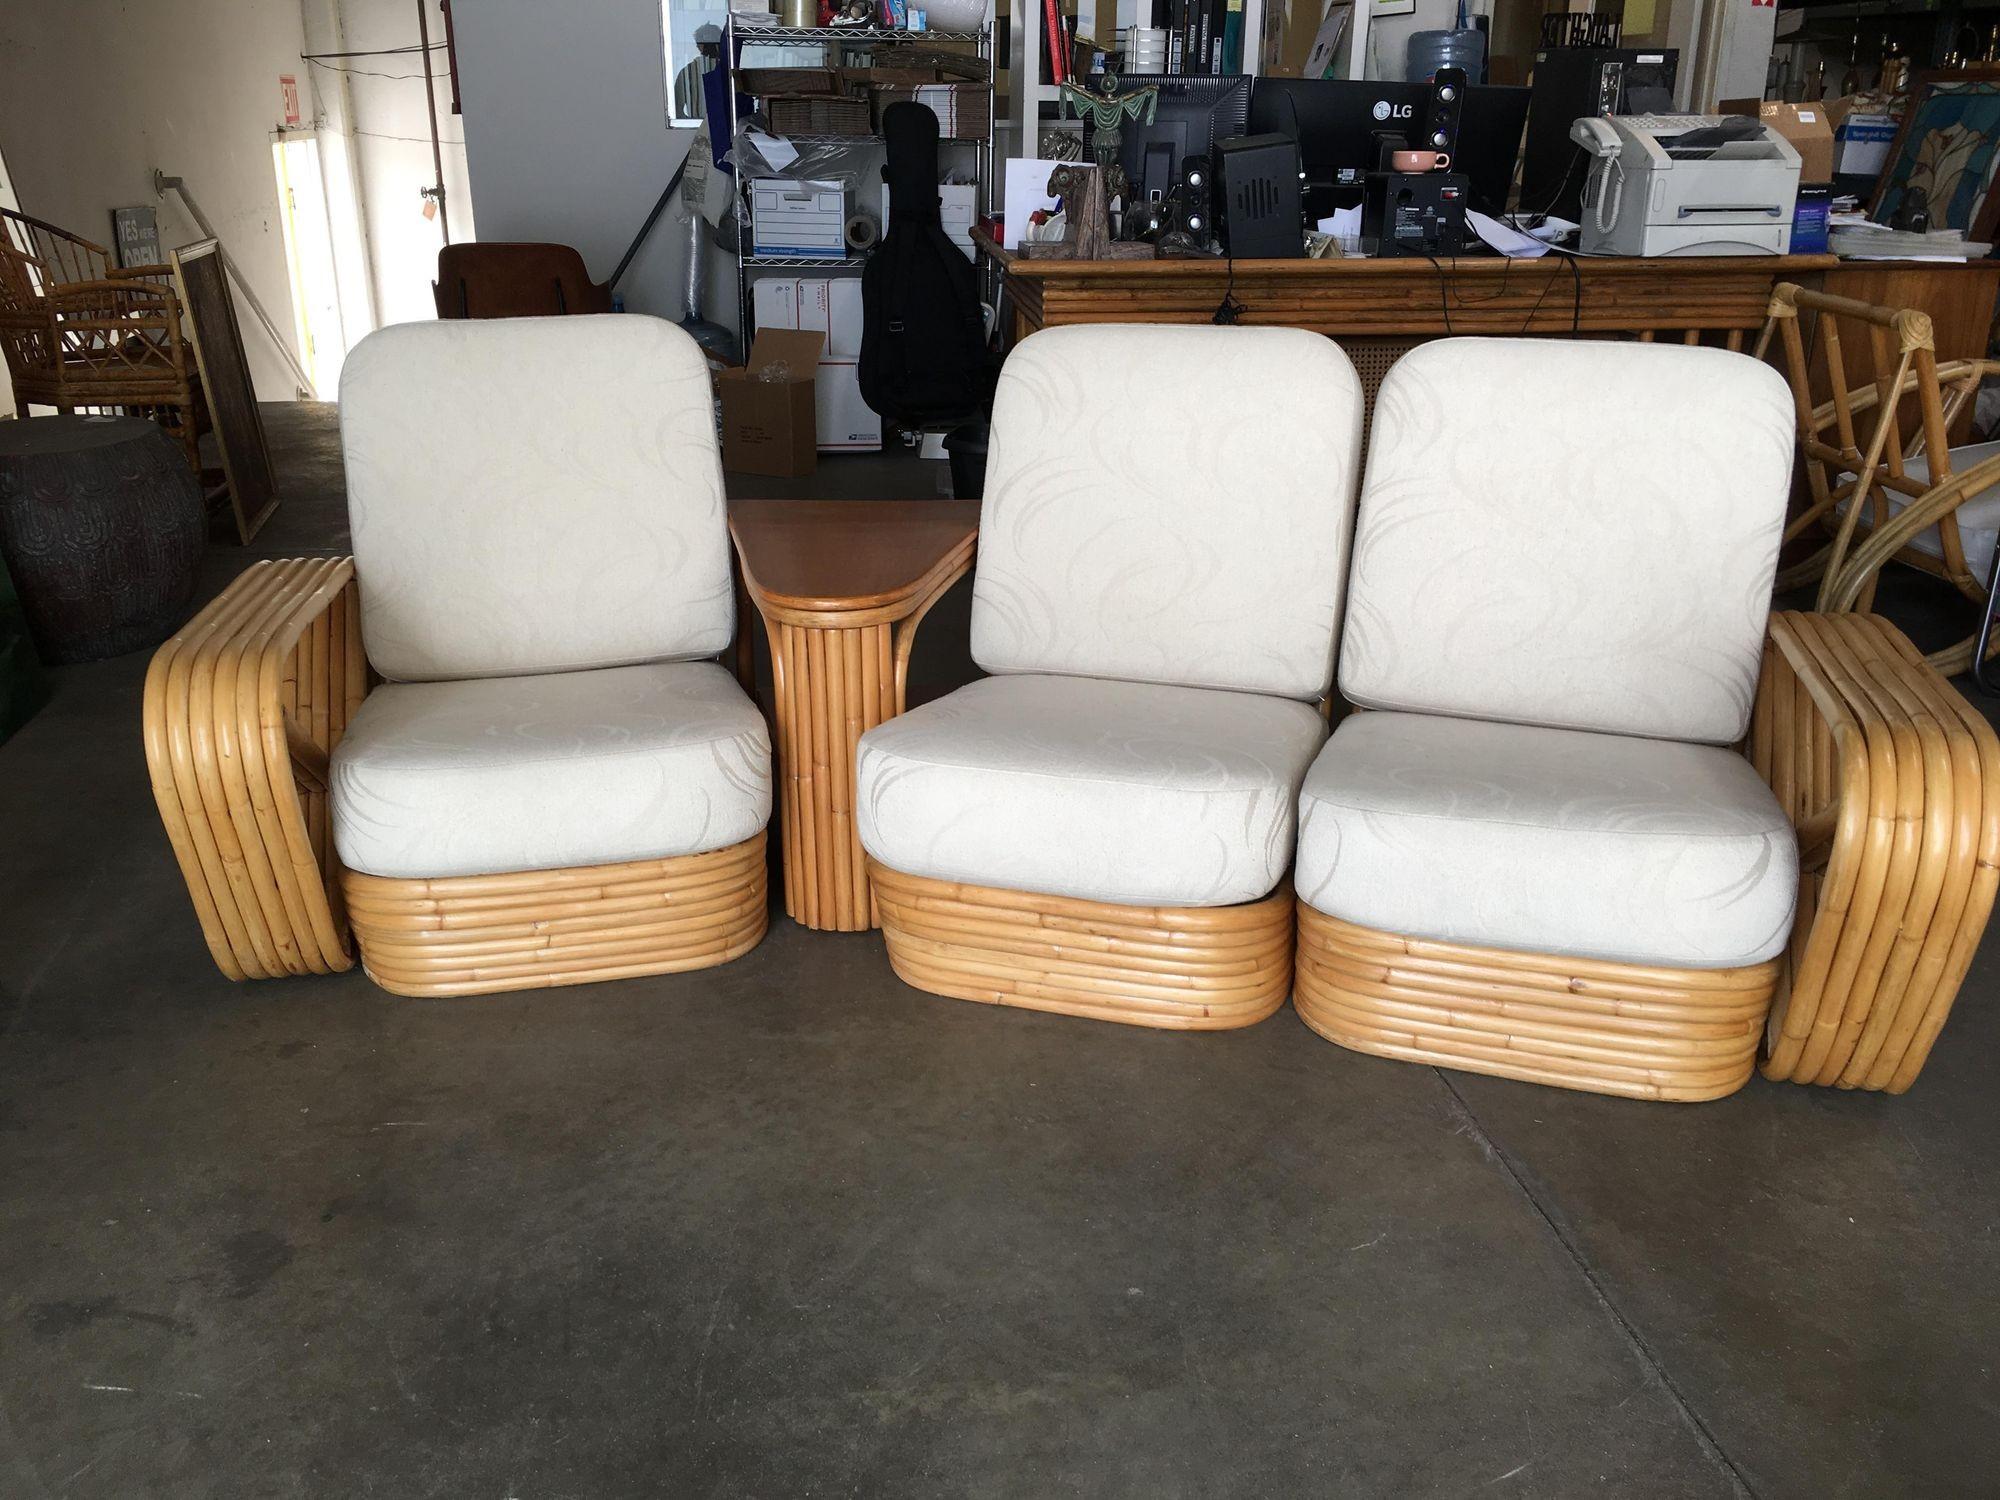 Rare Square Pretzel rattan 3 seater sectional sofa with Paul Frankl inspired design featuring 6 strand rattan arms and Stacked pole base. Comes with rattan side table with can be configured in several arrangements.
 
Sofa: 32in. H x 80in. W x 34in.